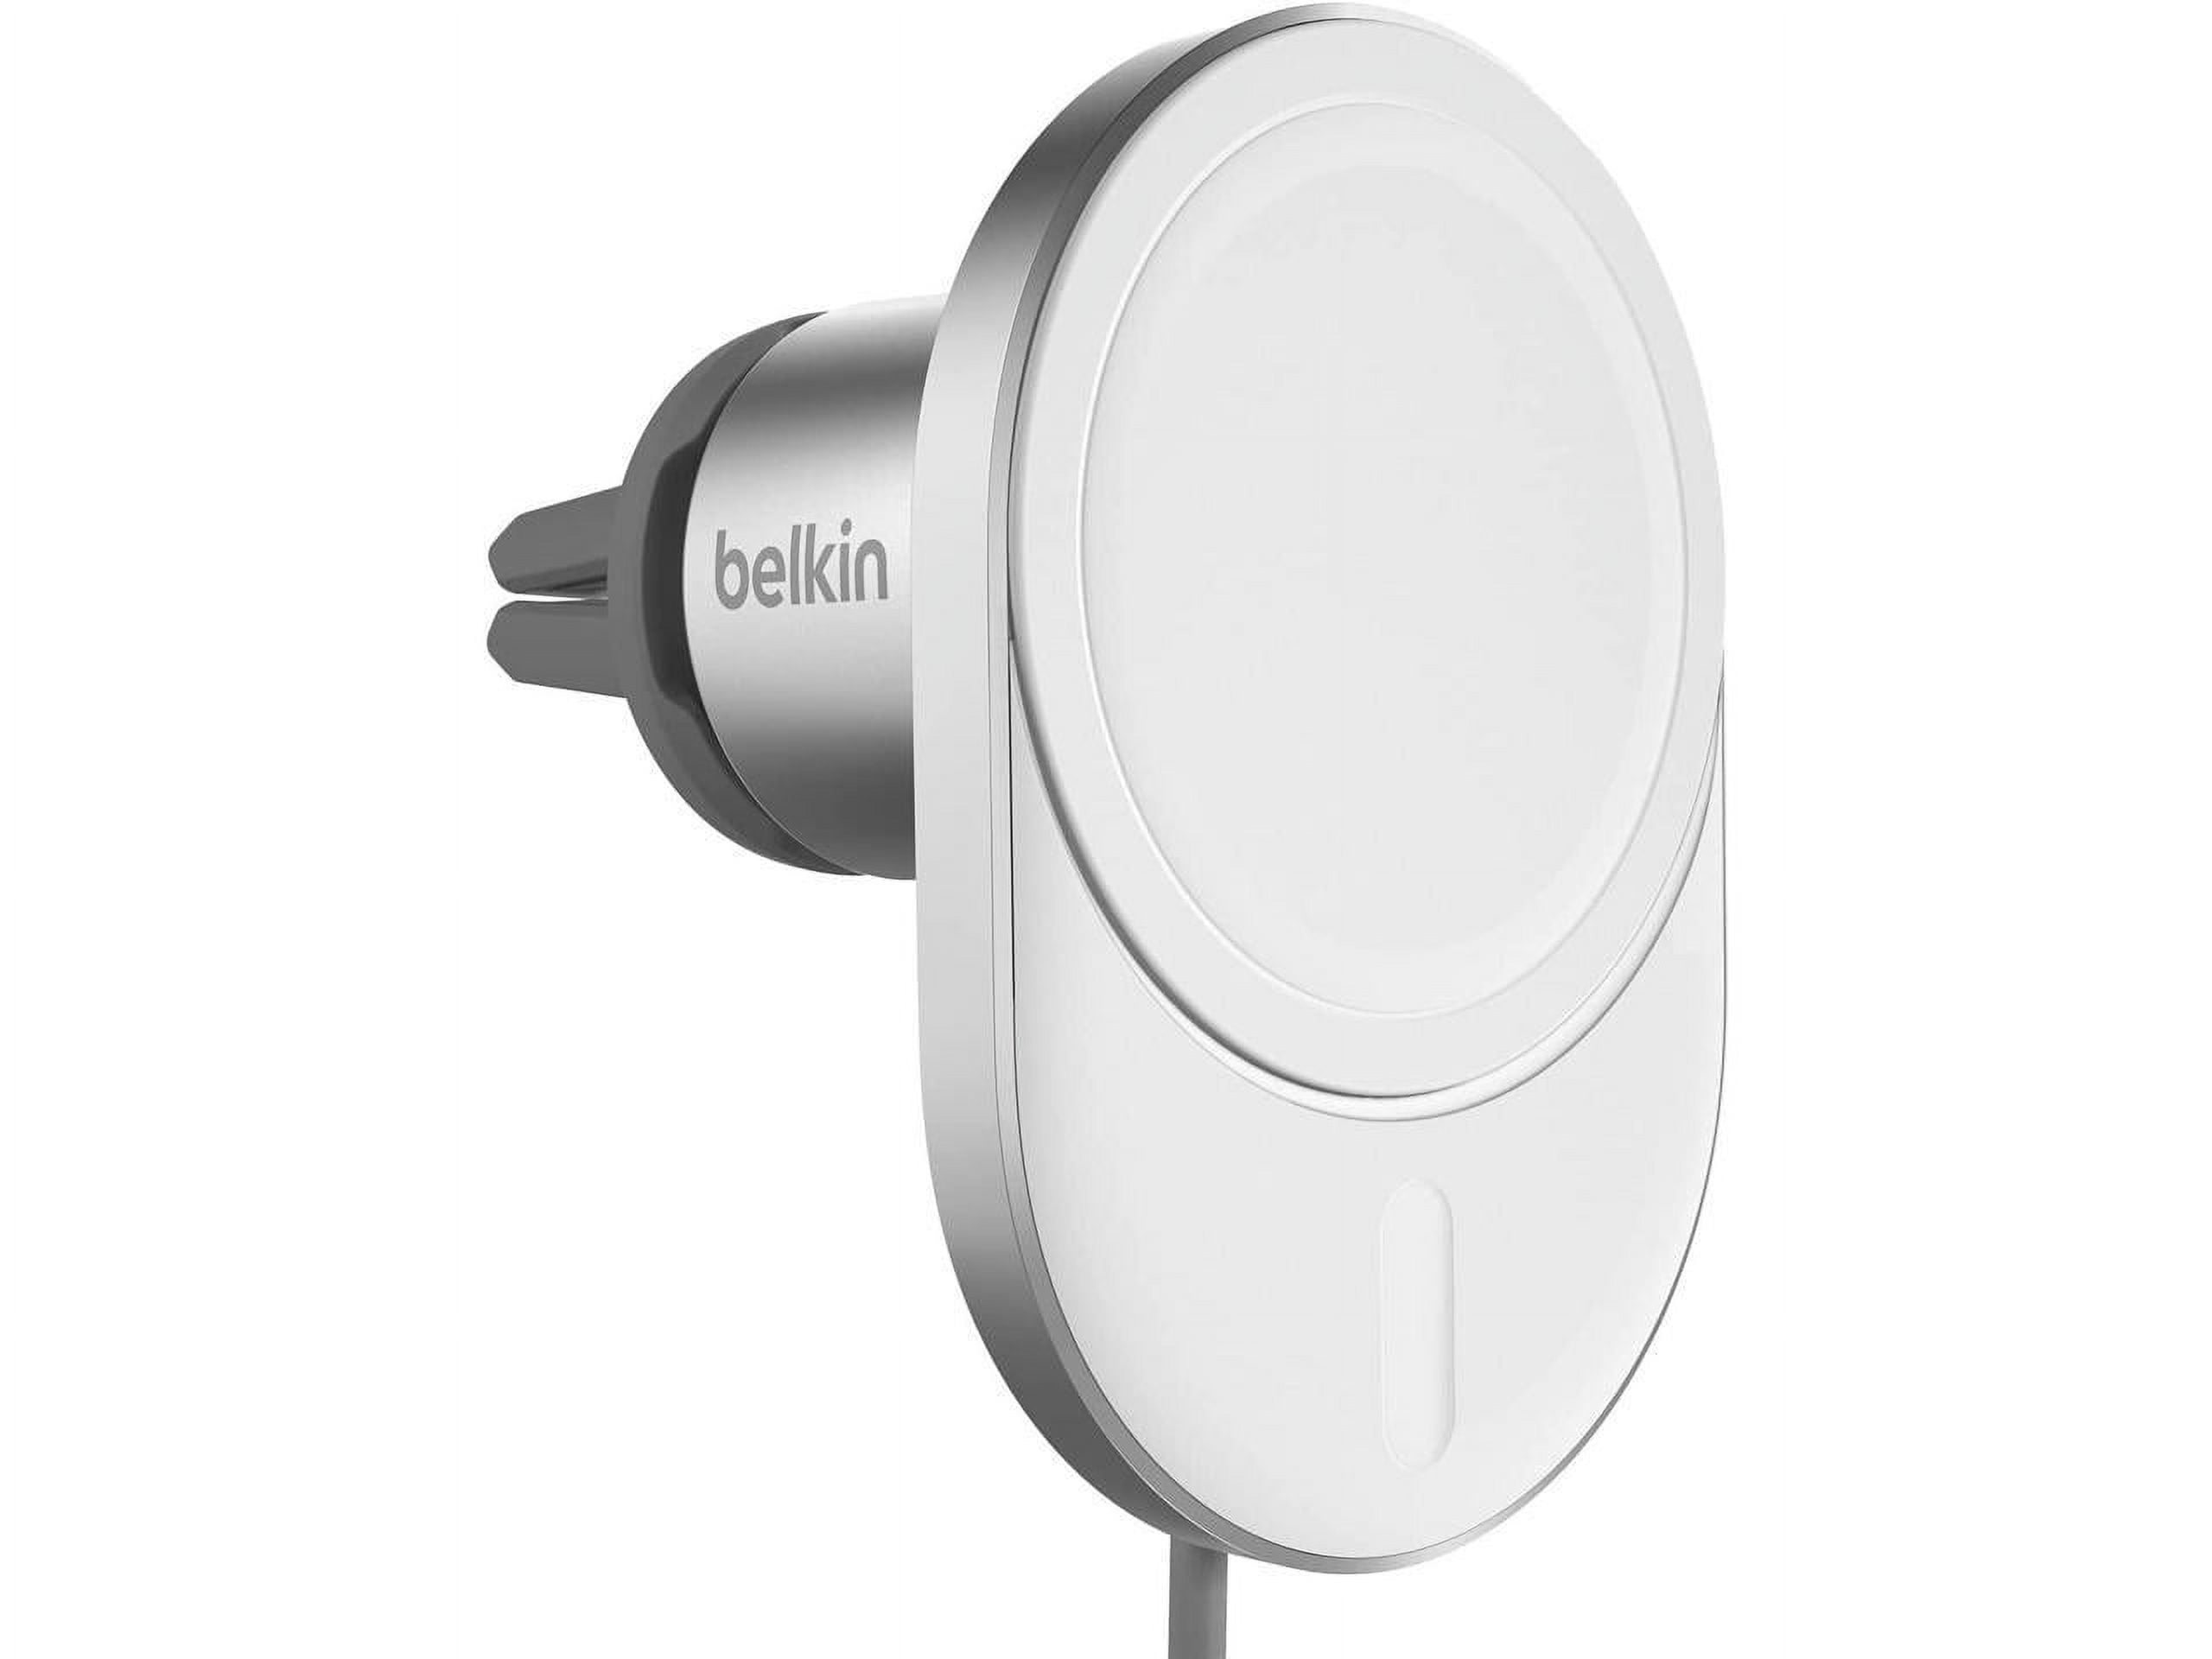 Belkin's MagSafe Car Vent Mount Pro review: not as 'pro' as we'd like